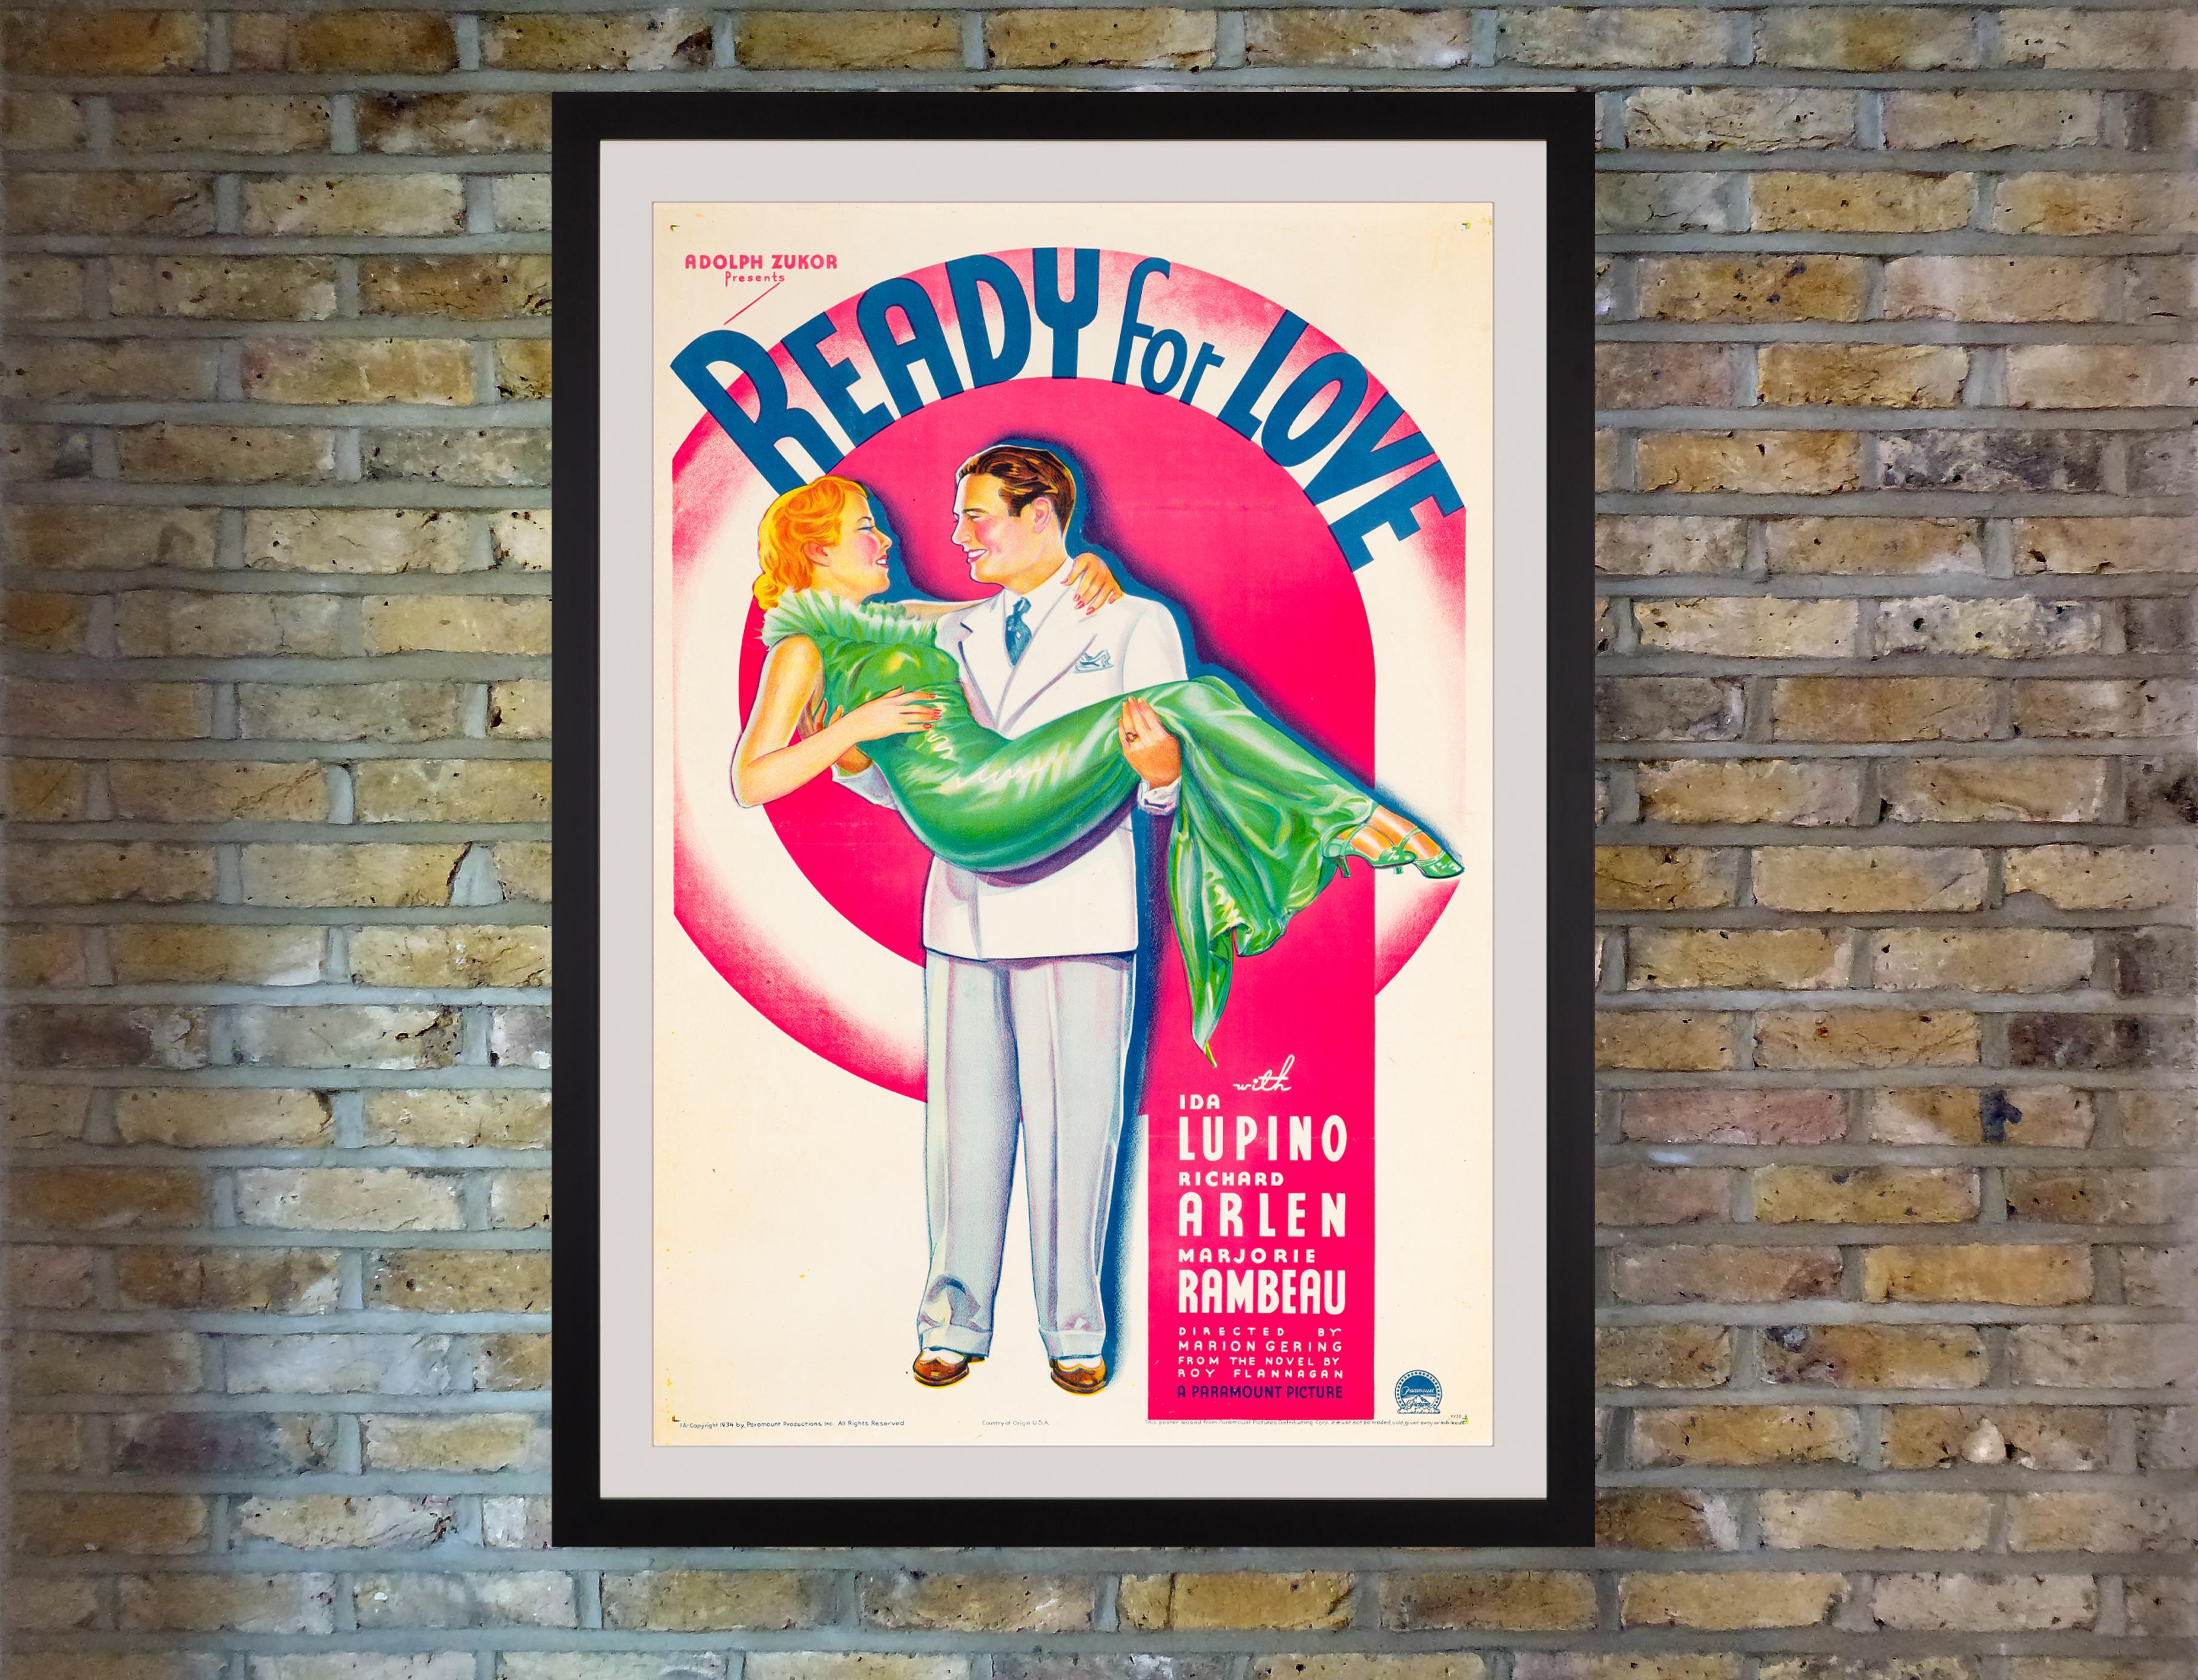 The dazzling Art Deco design, standout typography and vividly contrasting candy pink and emerald green tones combine to irresistible effect on this rare US One Sheet poster for the 1934 Paramount Pictures romantic comedy ‘Ready For Love.’ The